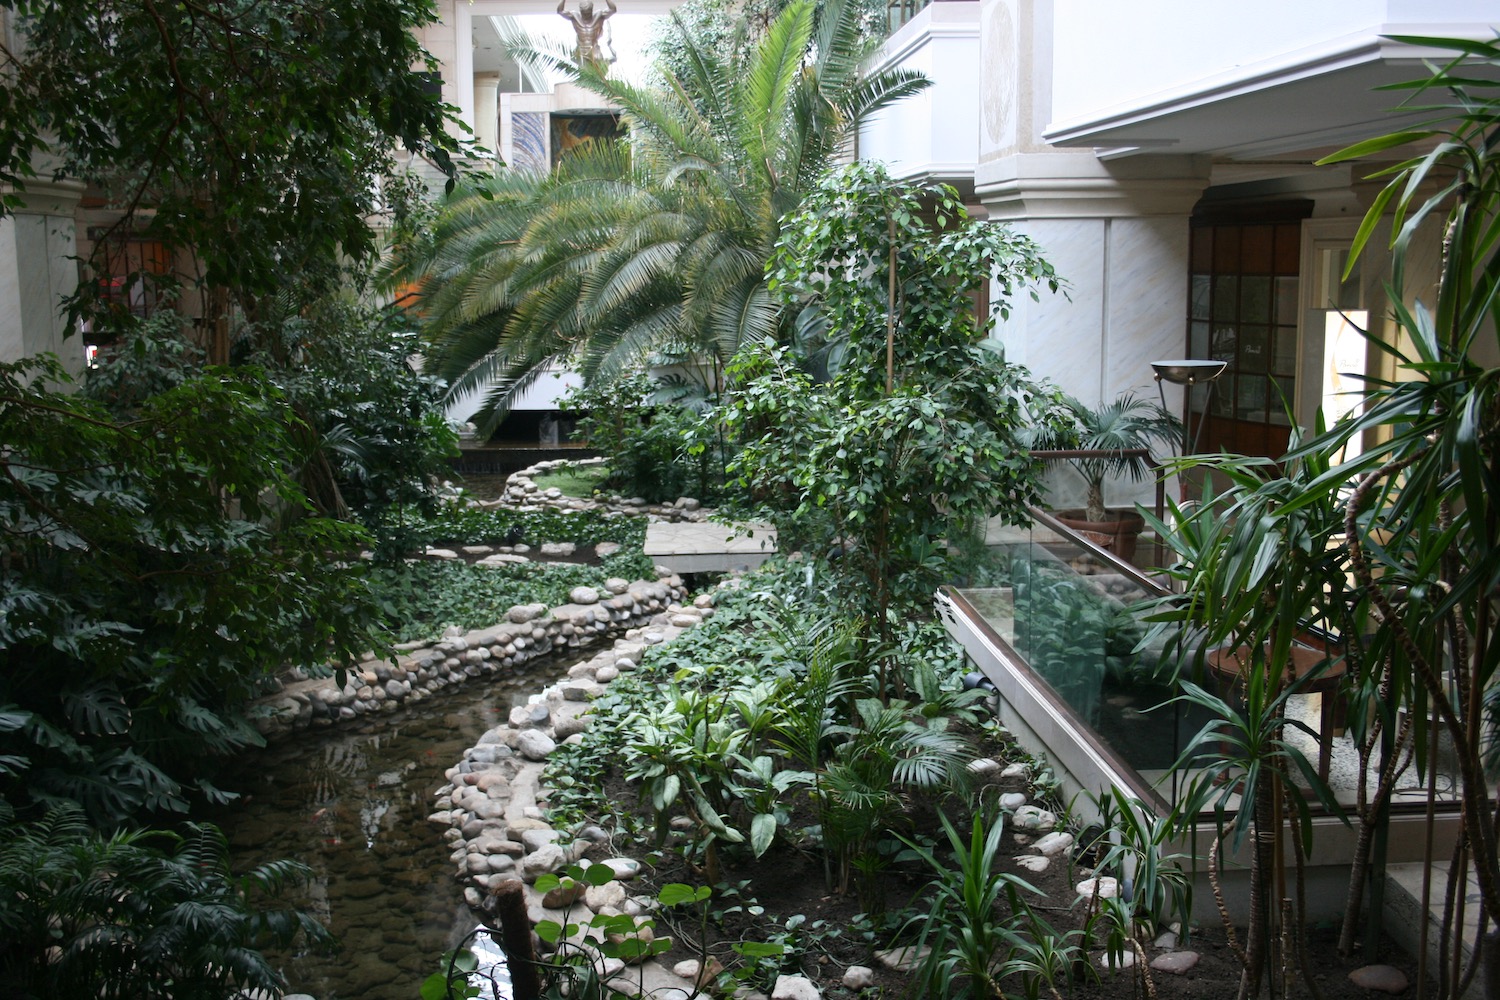 a small river with plants and trees in a courtyard